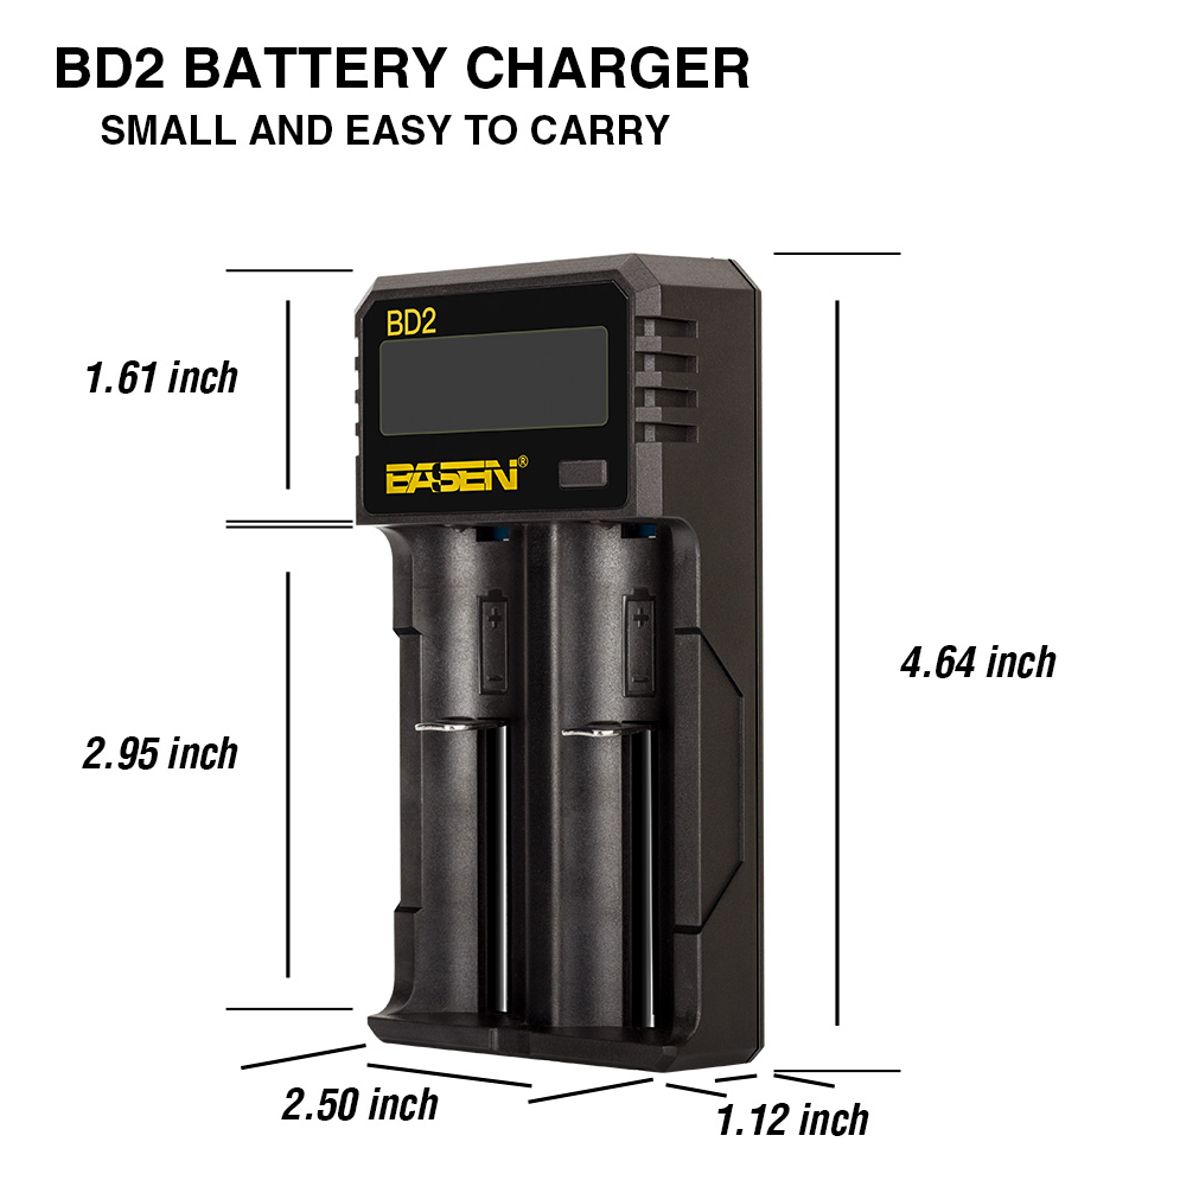 Basen-BD-2-18650-Power-Battery-Charger-Li-on-LCD-Display-2-Slot-USB-Rechargeable-1459454